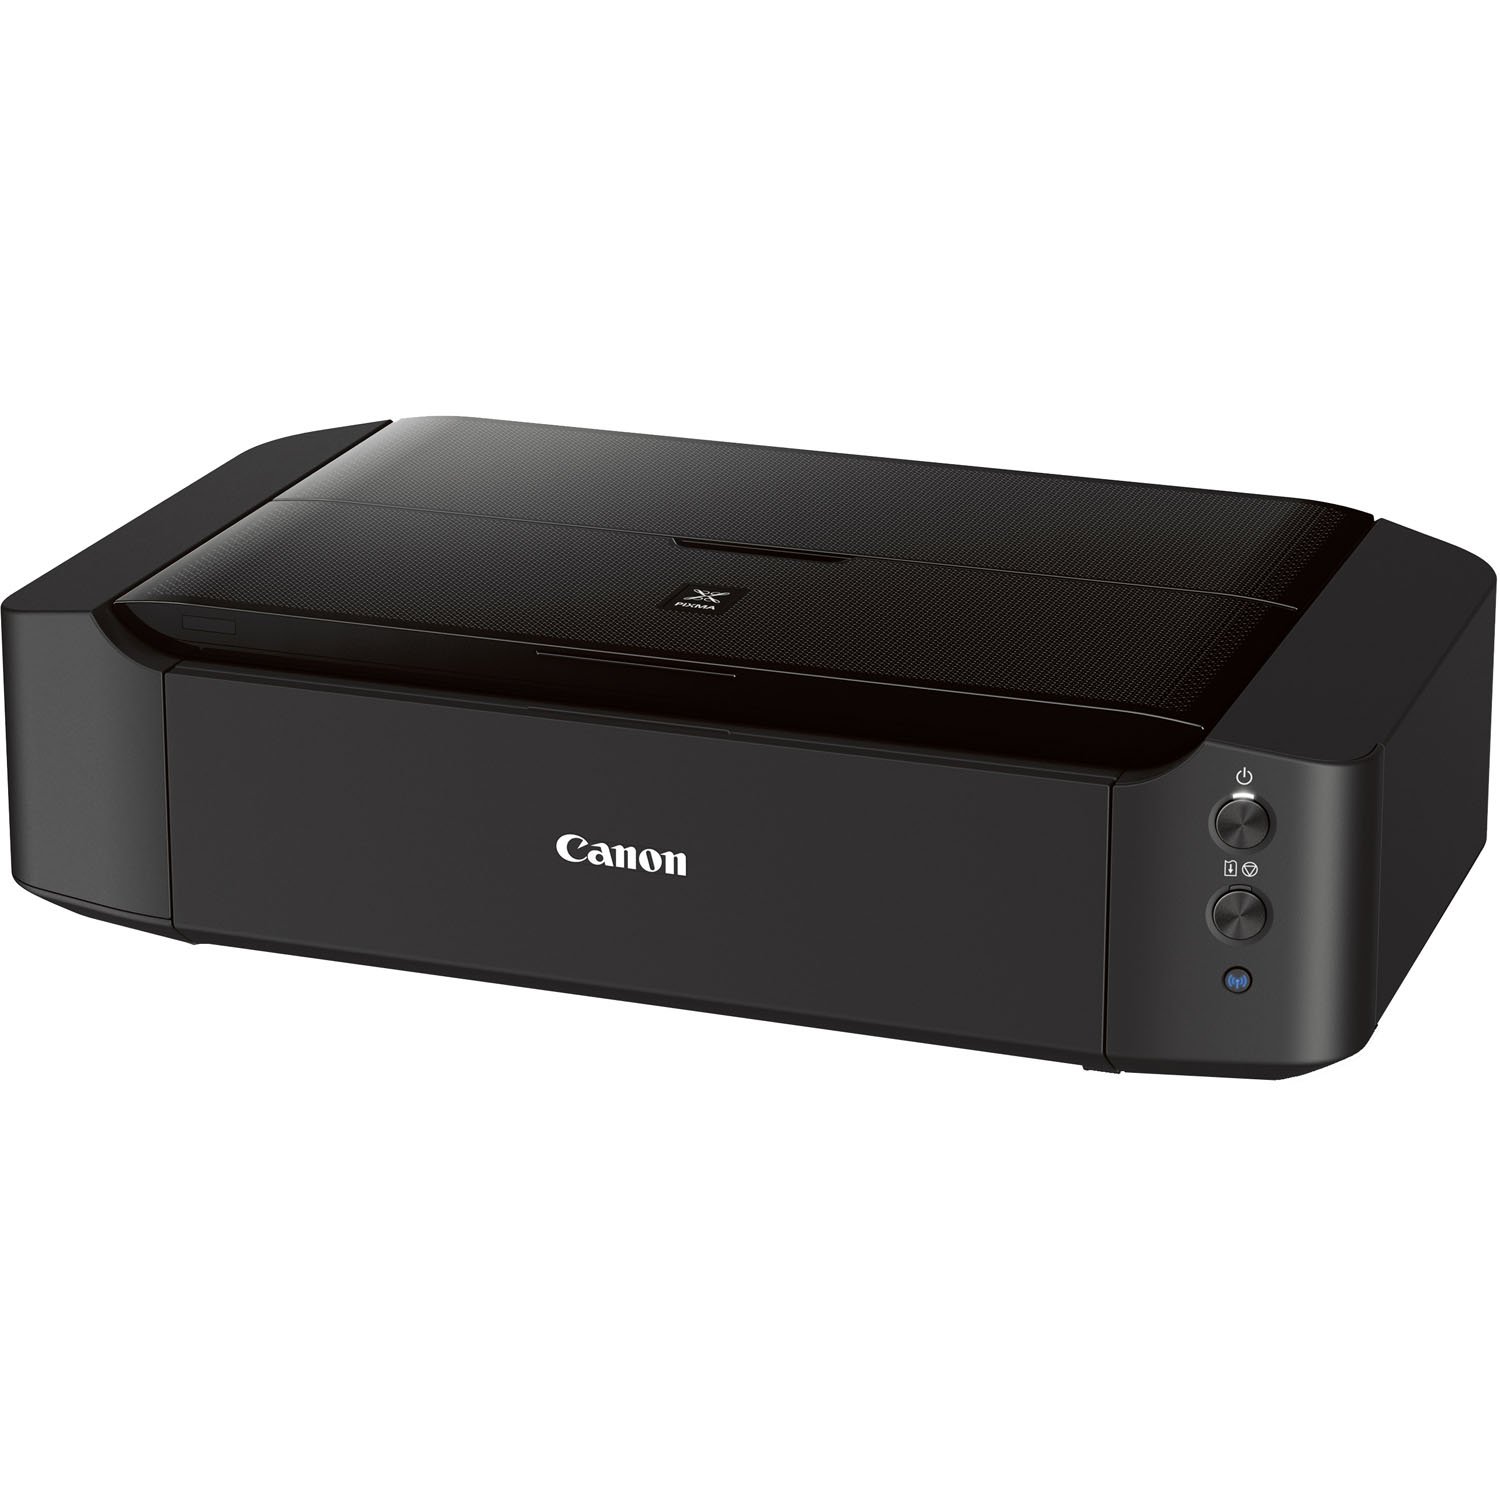 Canon IP8720 Wireless Printer, AirPrint and Cloud Compatible, Black